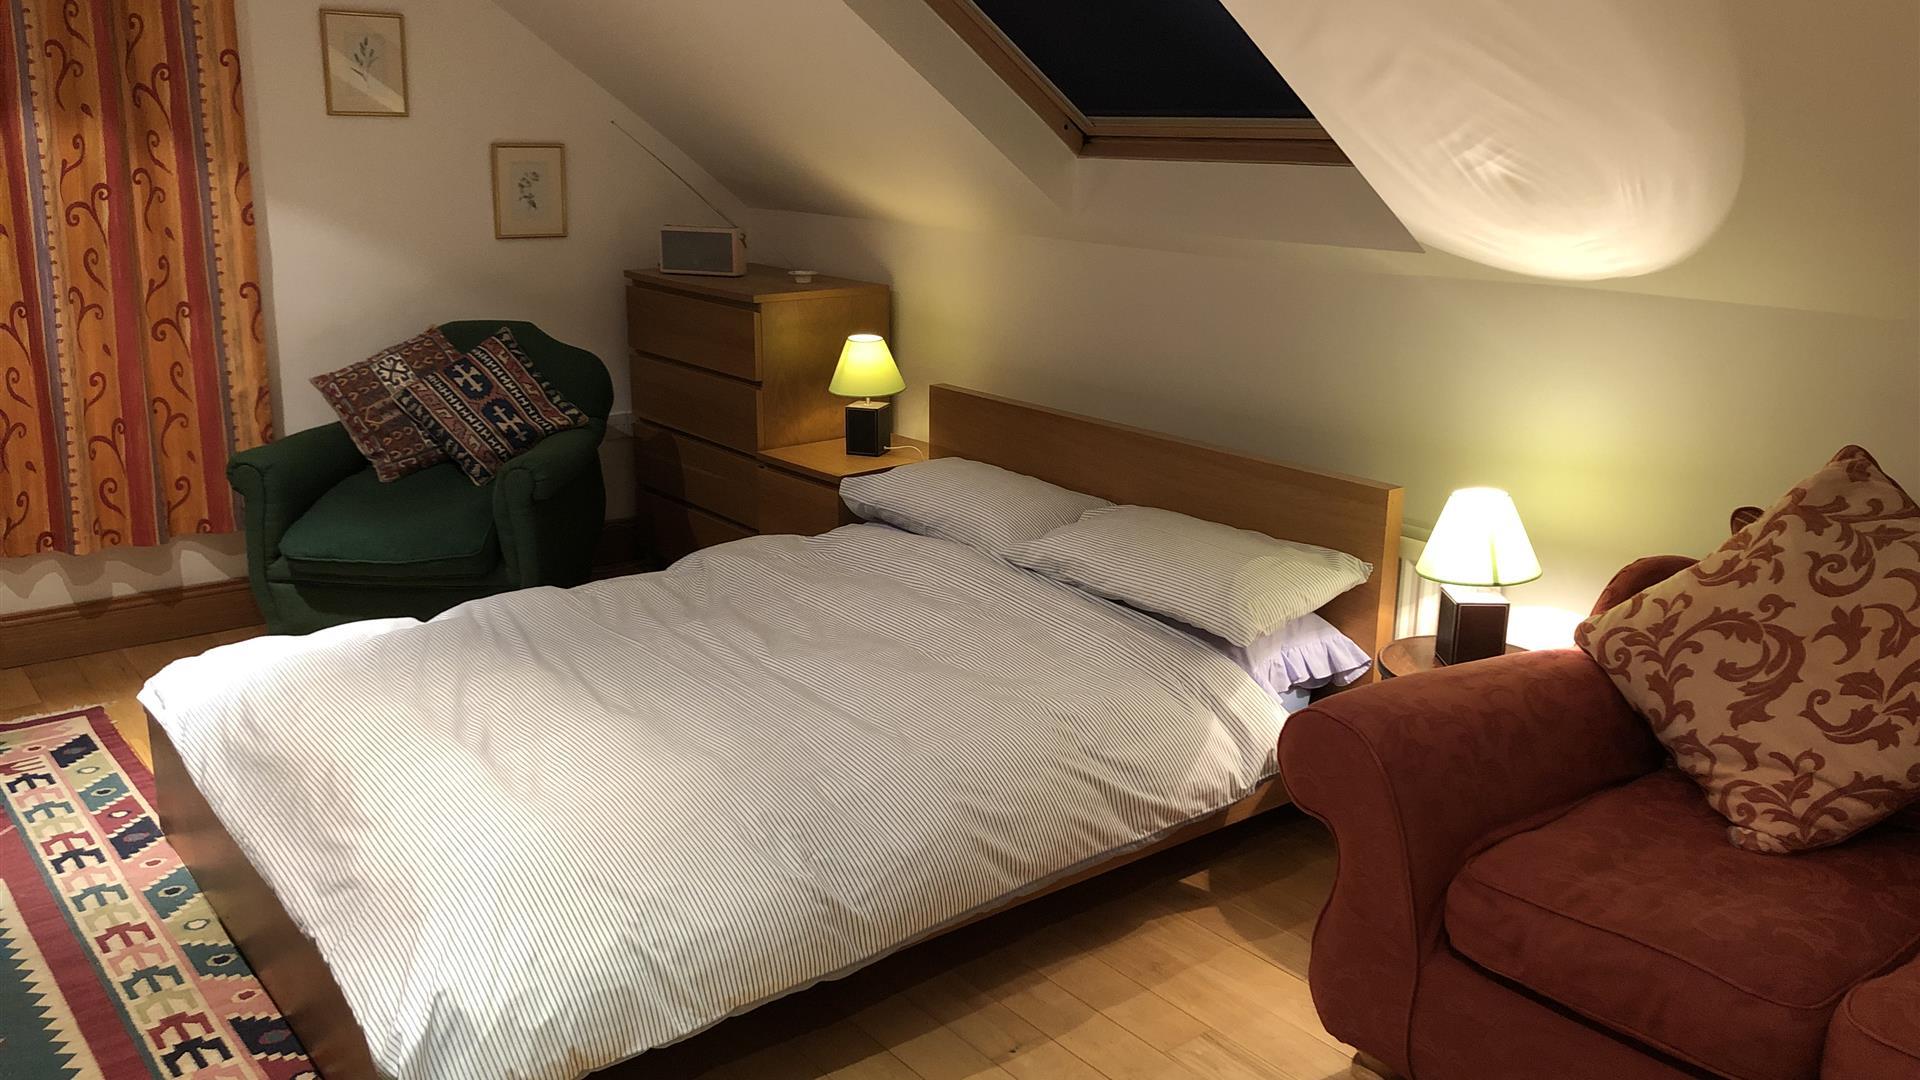 Image shows bedroom with double bed, 2 side tables and 2 chairs. Skylight above the bed.